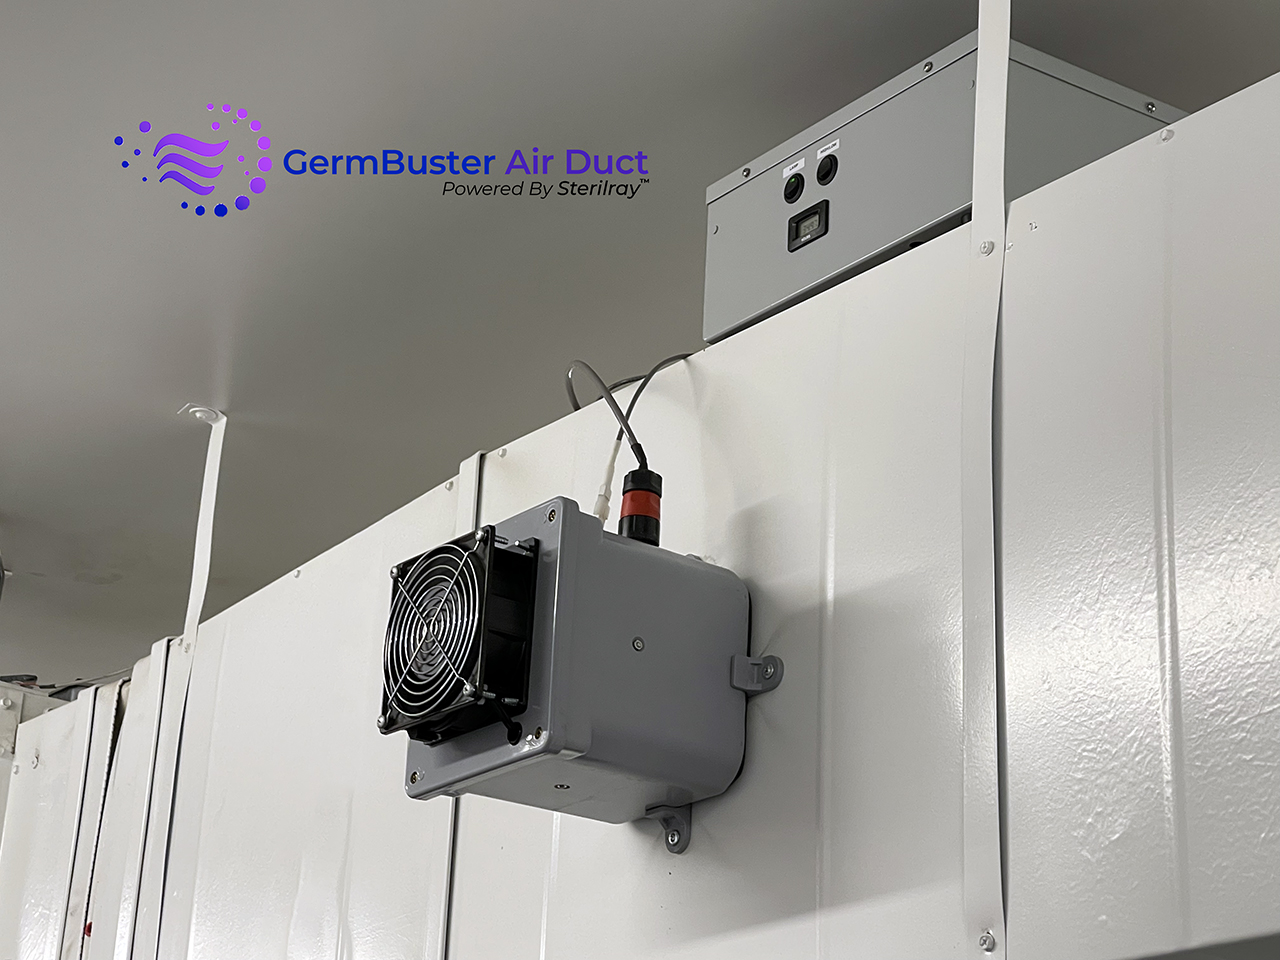 GermBuster Air Duct installed in a Vegas Cannabis Grow